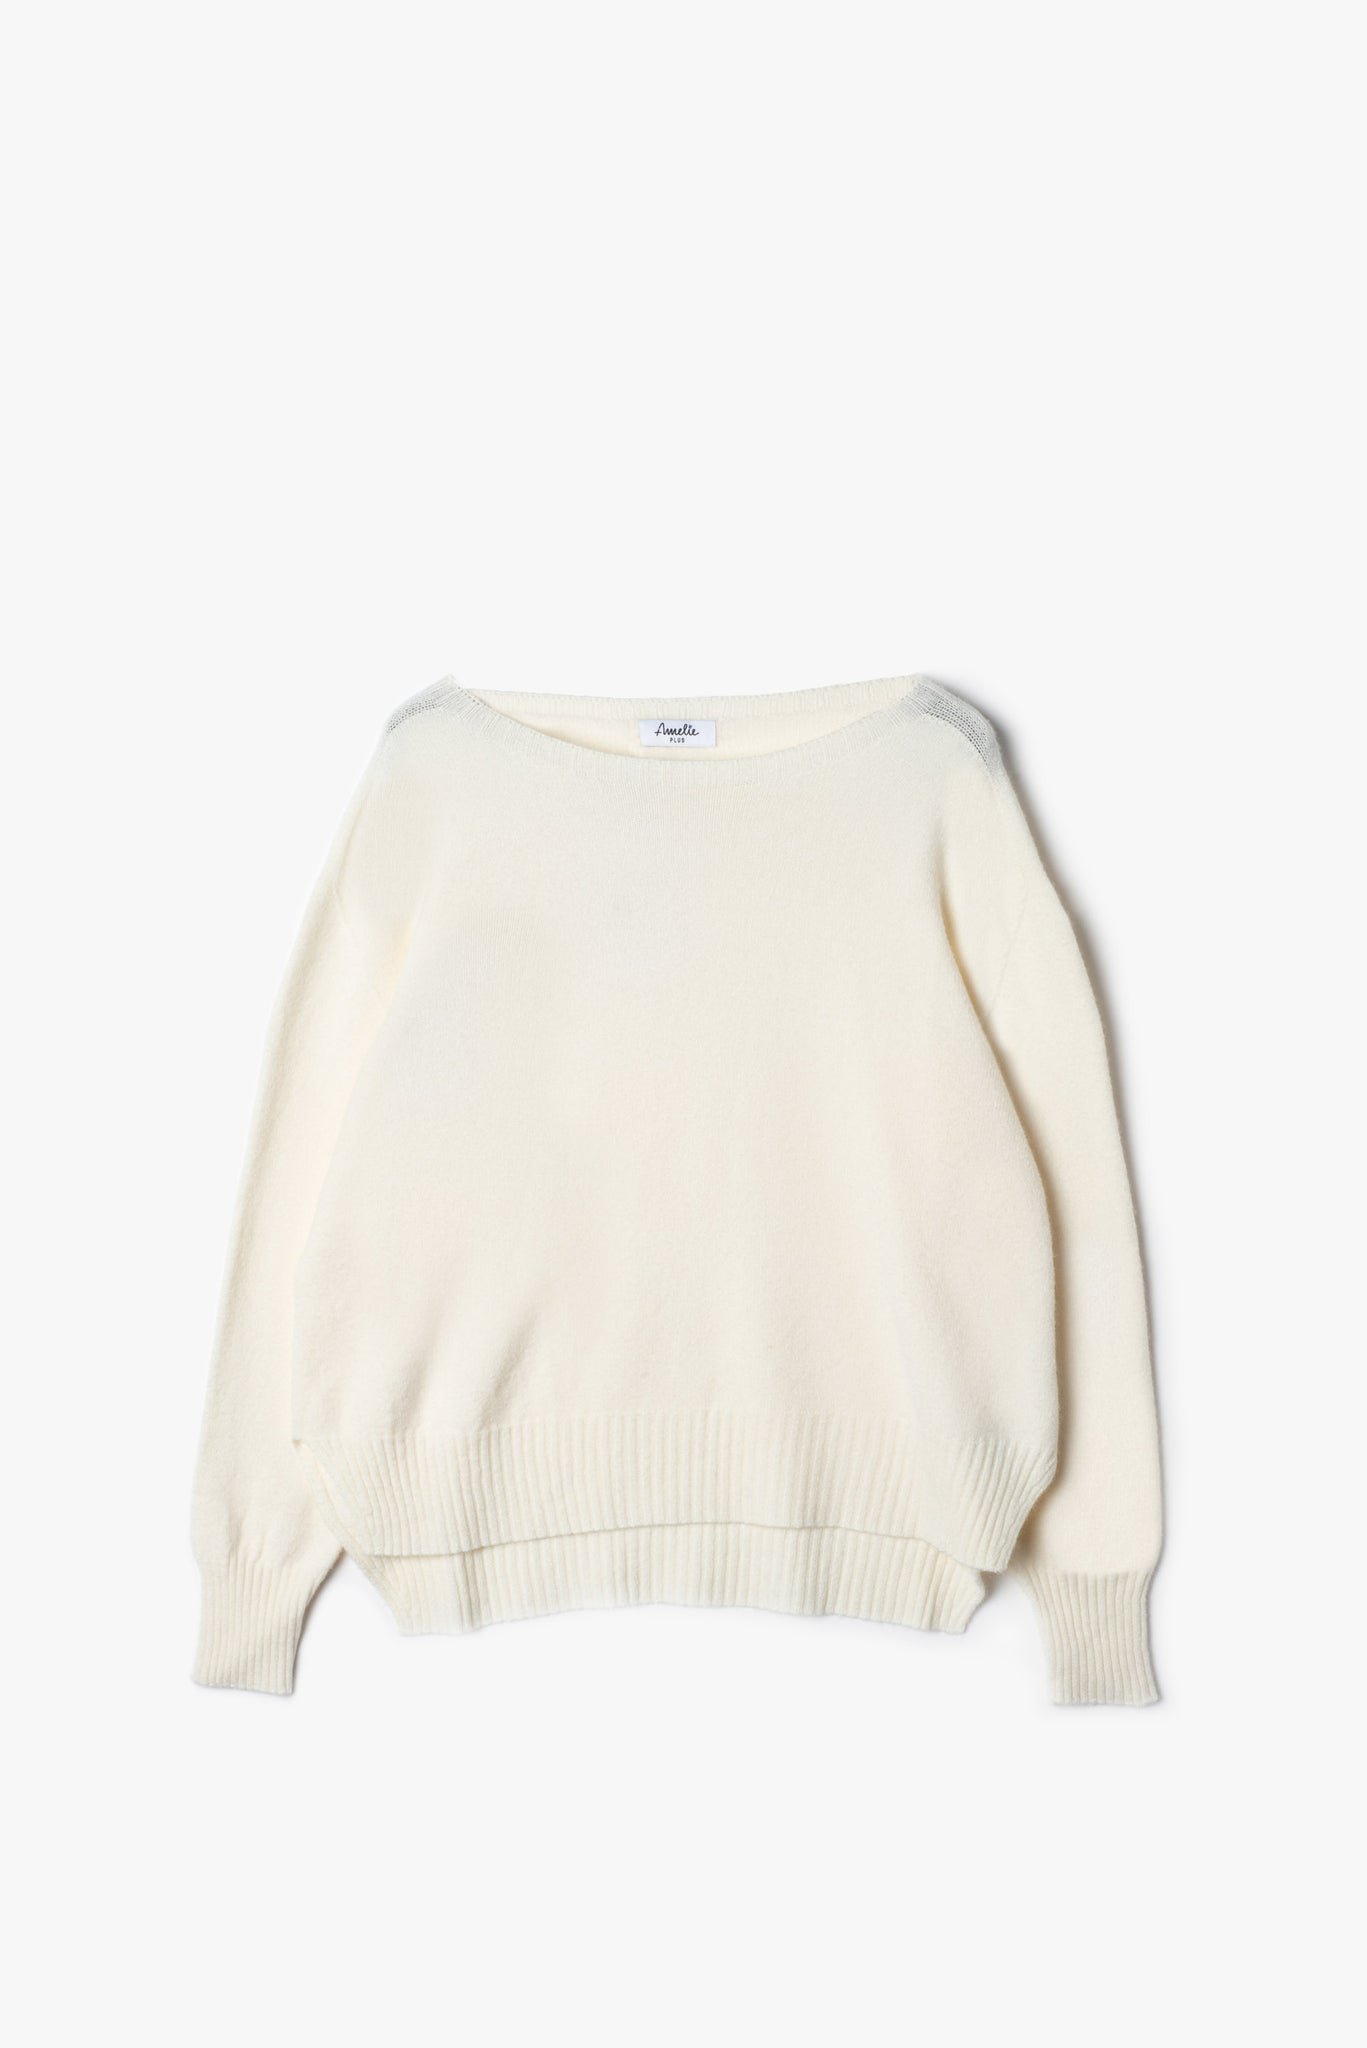 Asymmetrical pullover with side slits